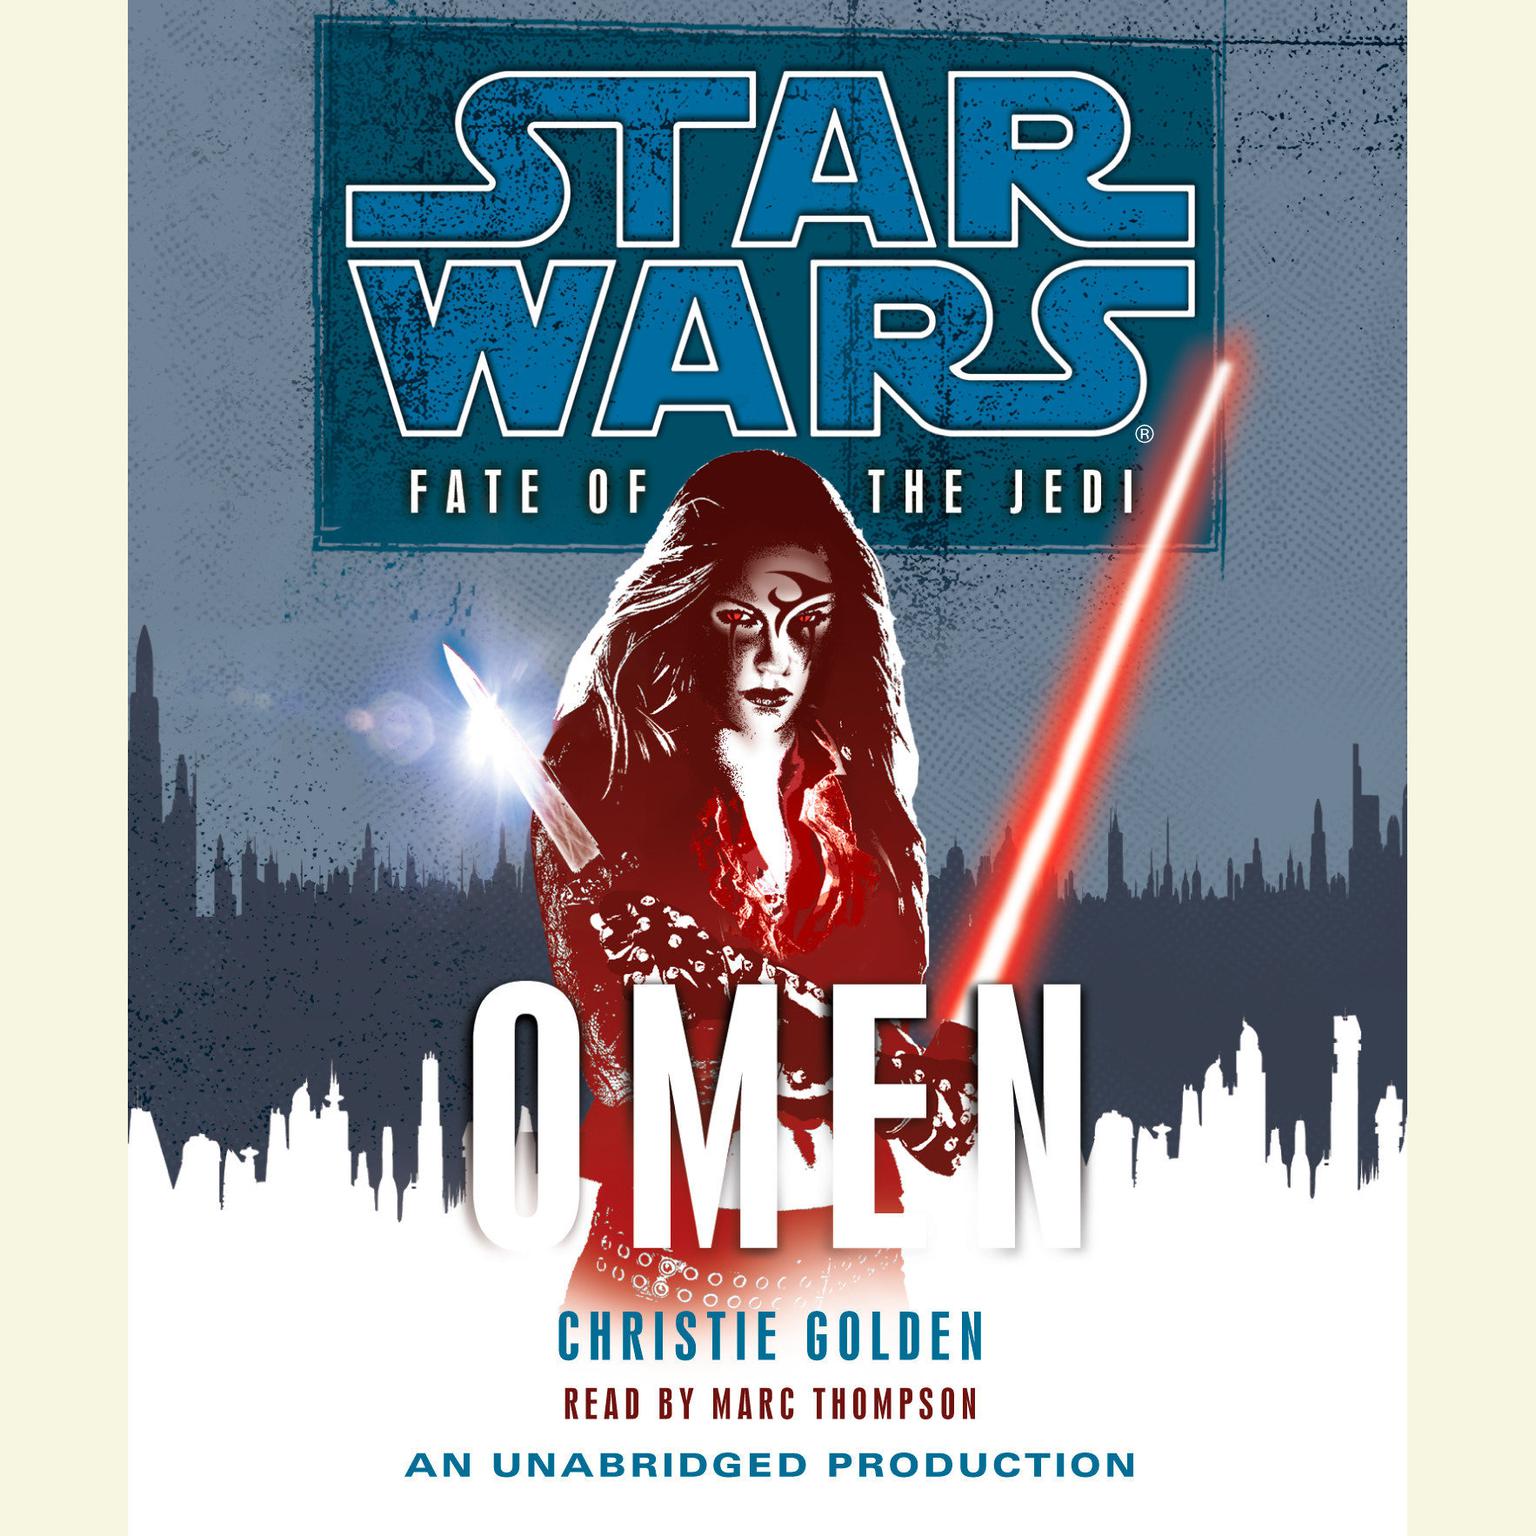 Star Wars: Fate of the Jedi: Omen Audiobook, by Christie Golden